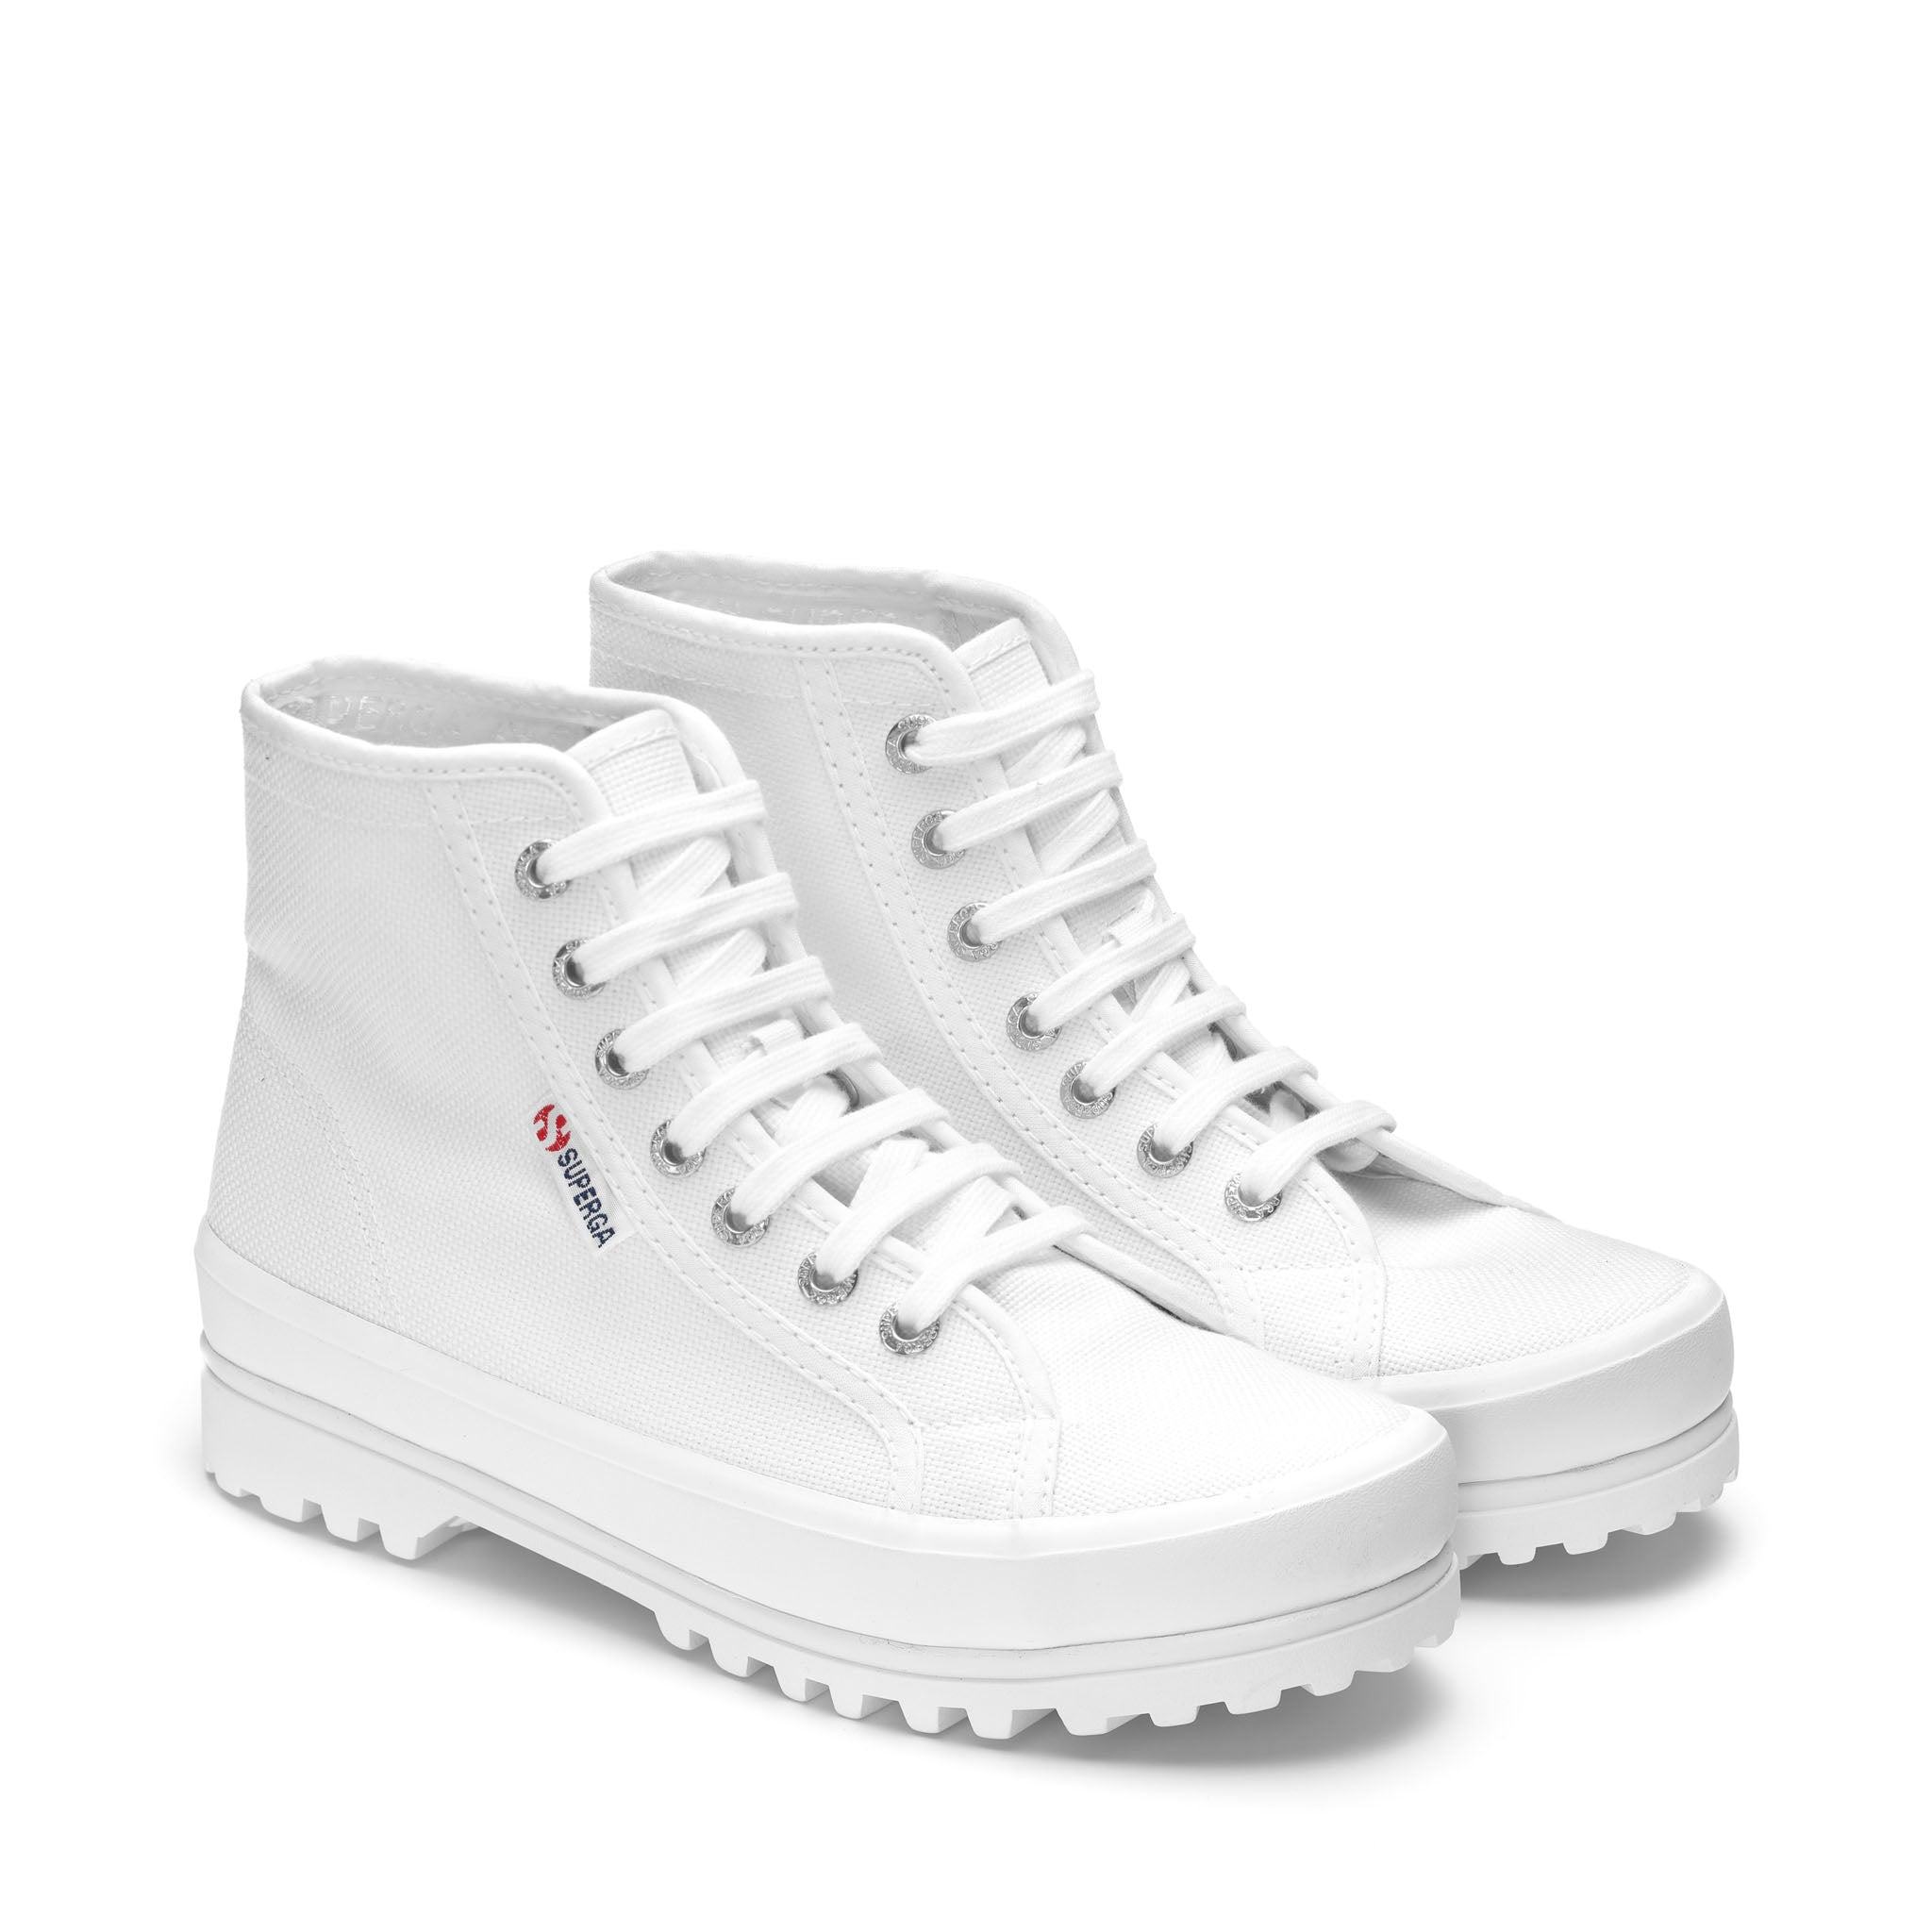 Superga 2341 Alpina High Top Sneakers - White. Front view.